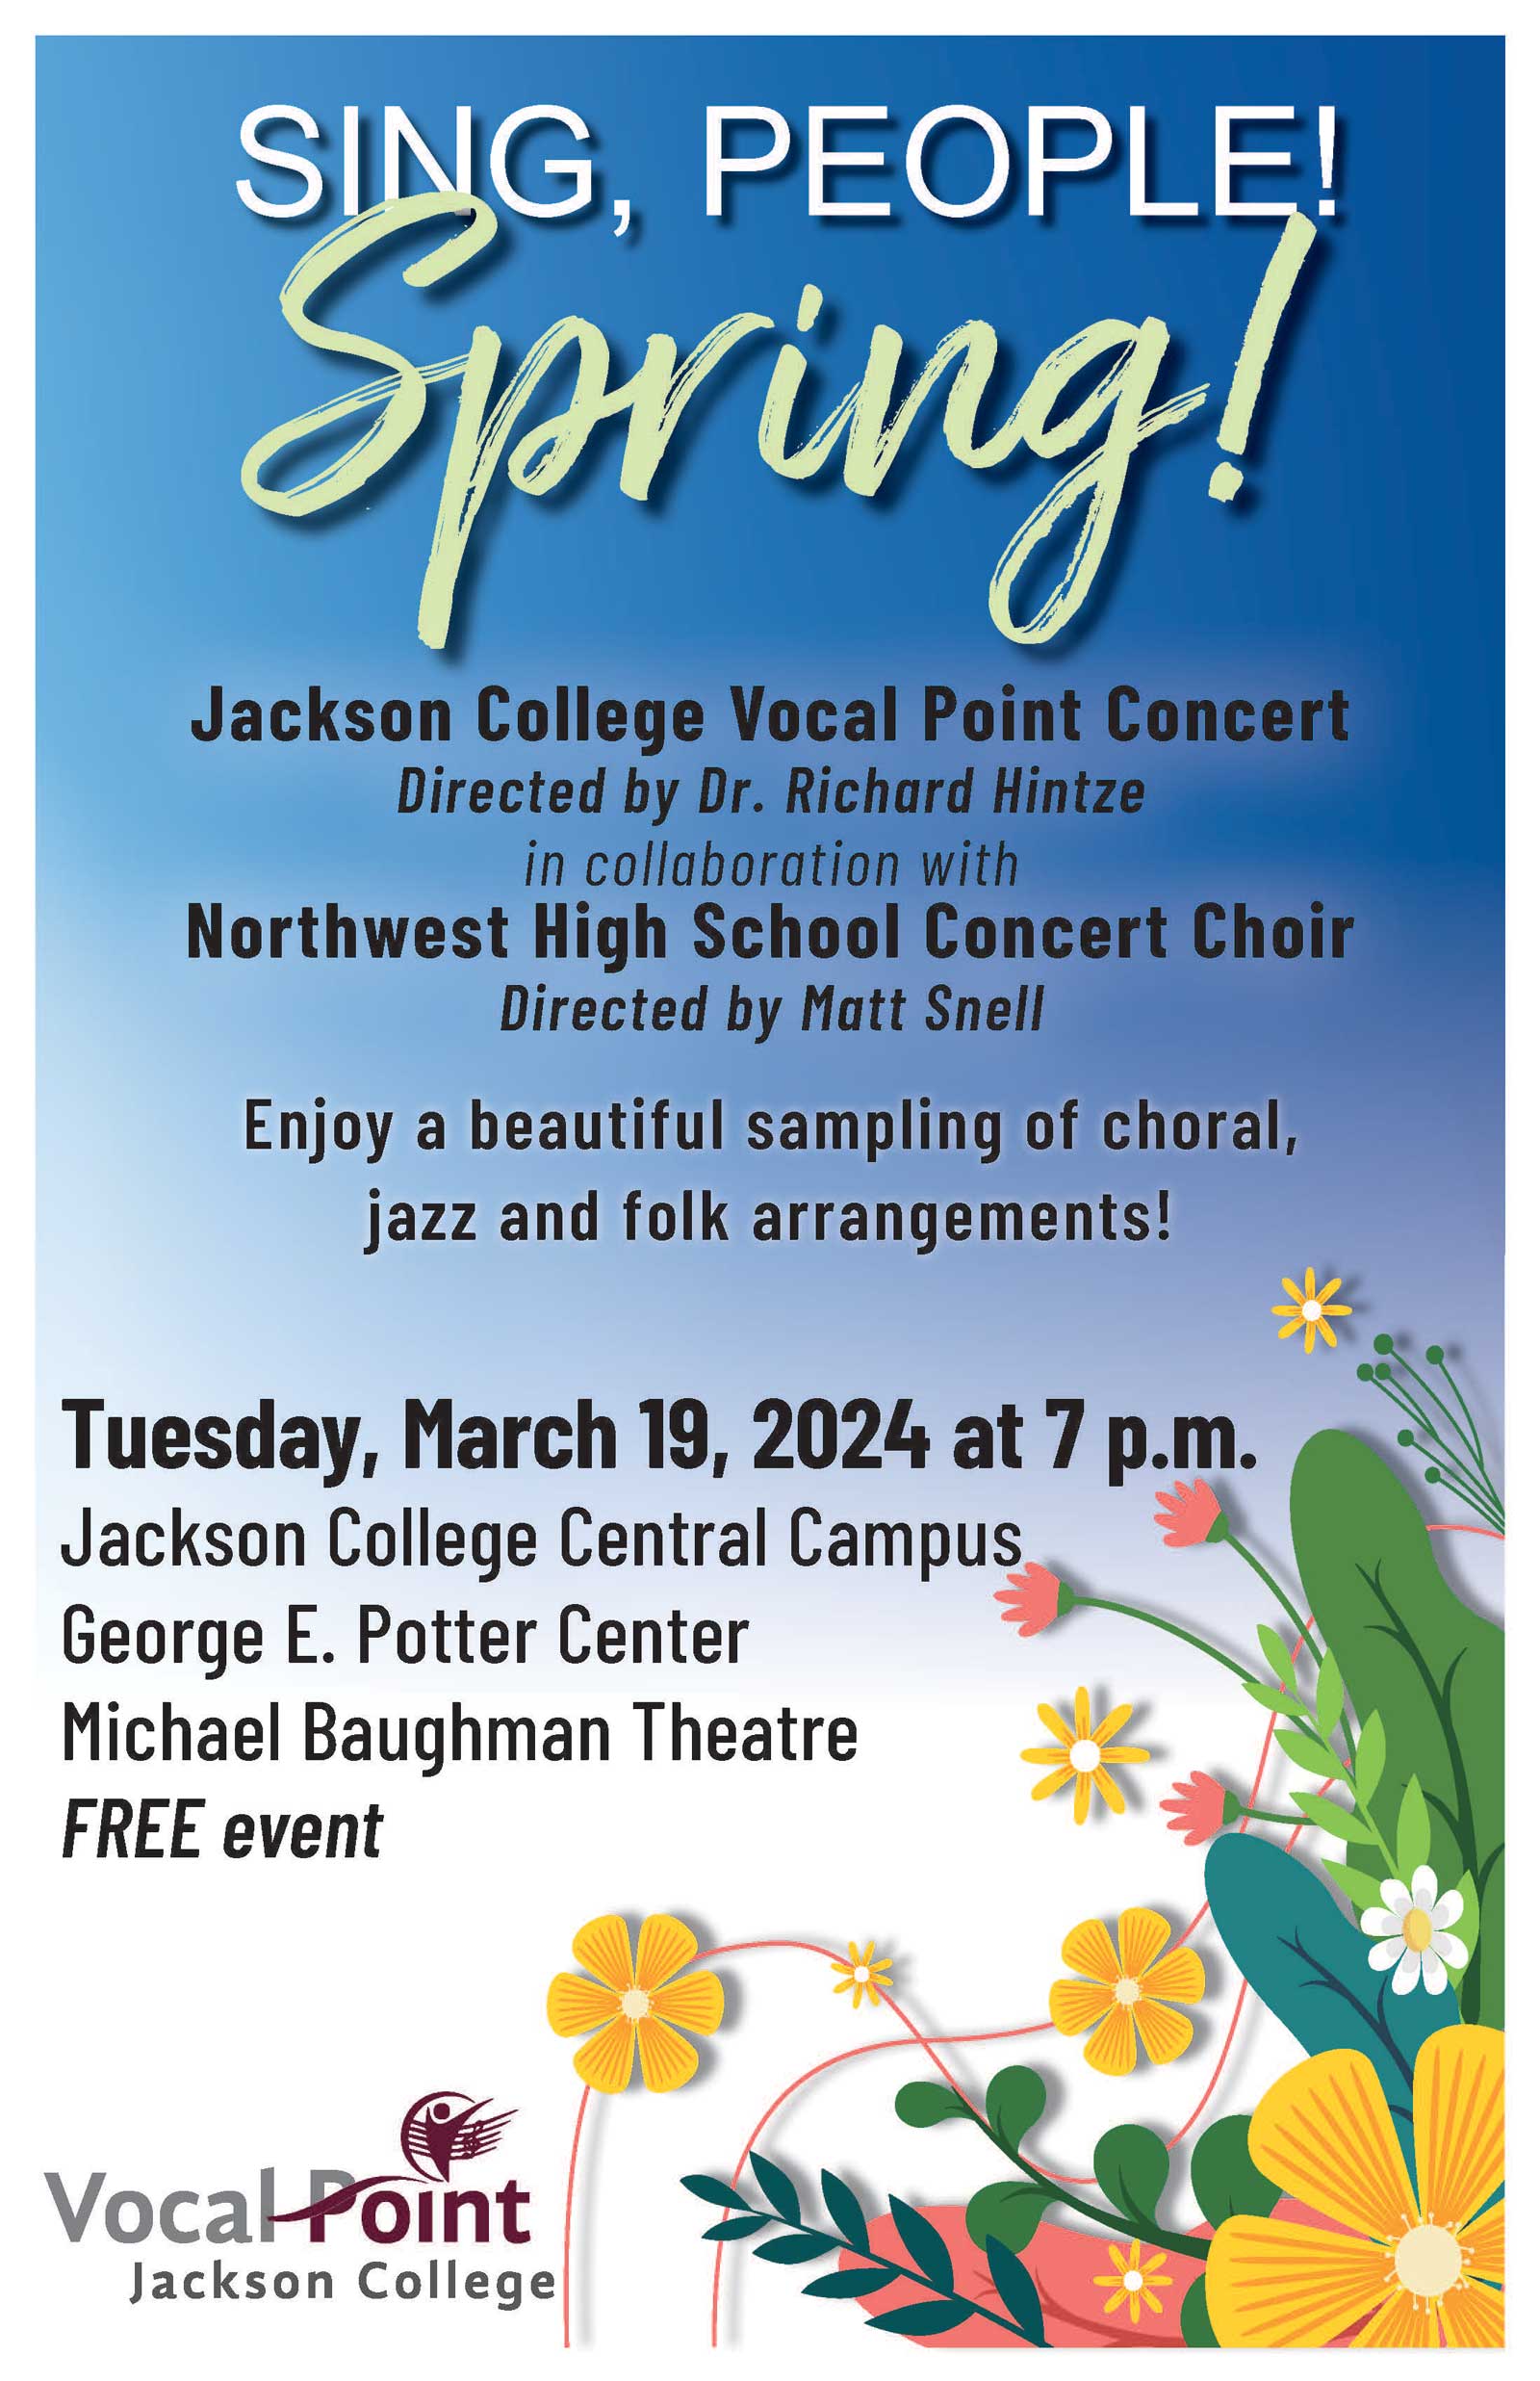 Jackson College Vocal Point, NWHS Concert Choir Present ‘Sing, People! Spring!’ Concert